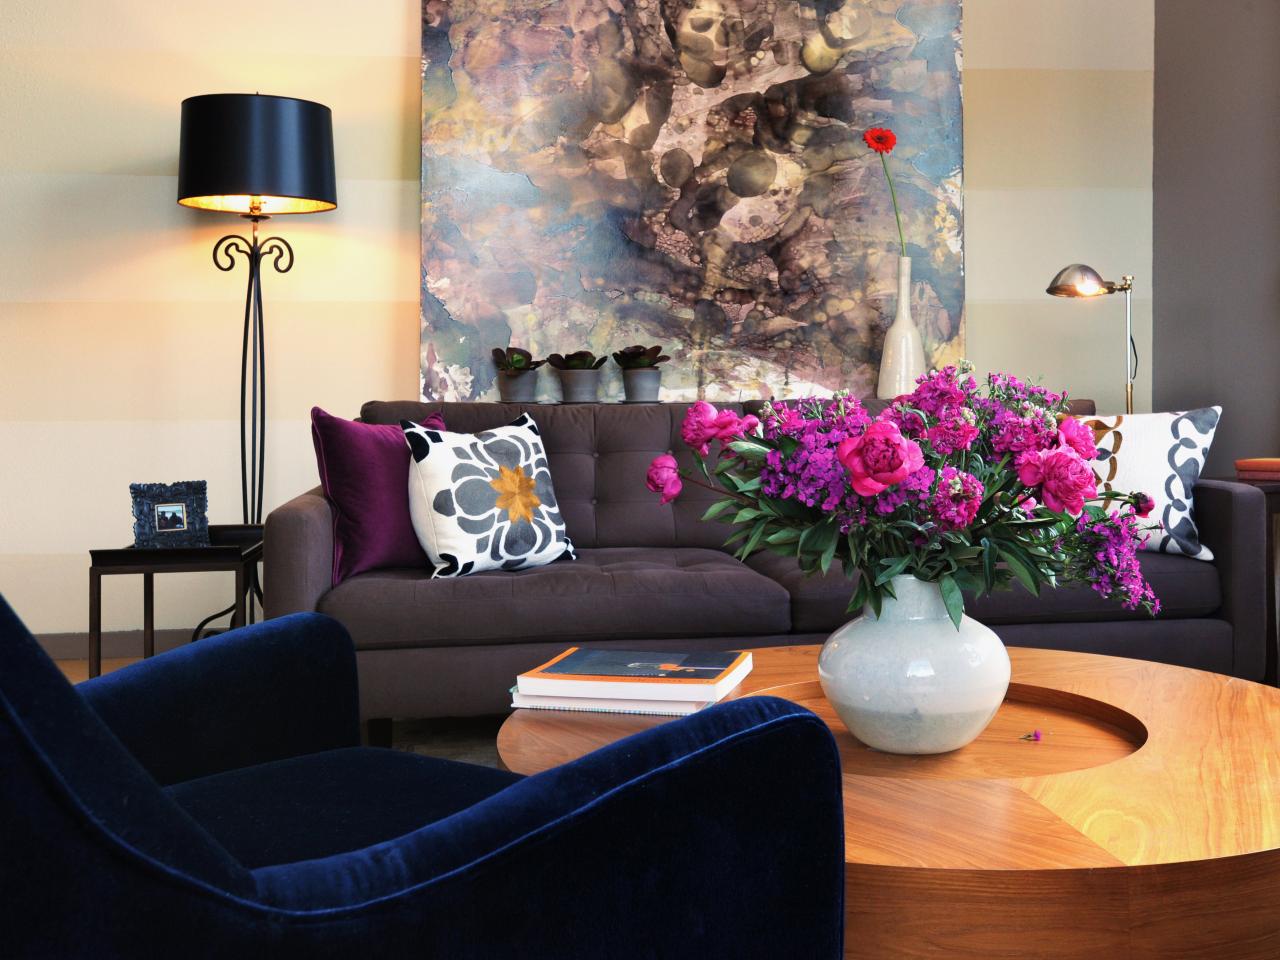 Flowers can uplift the living room décor